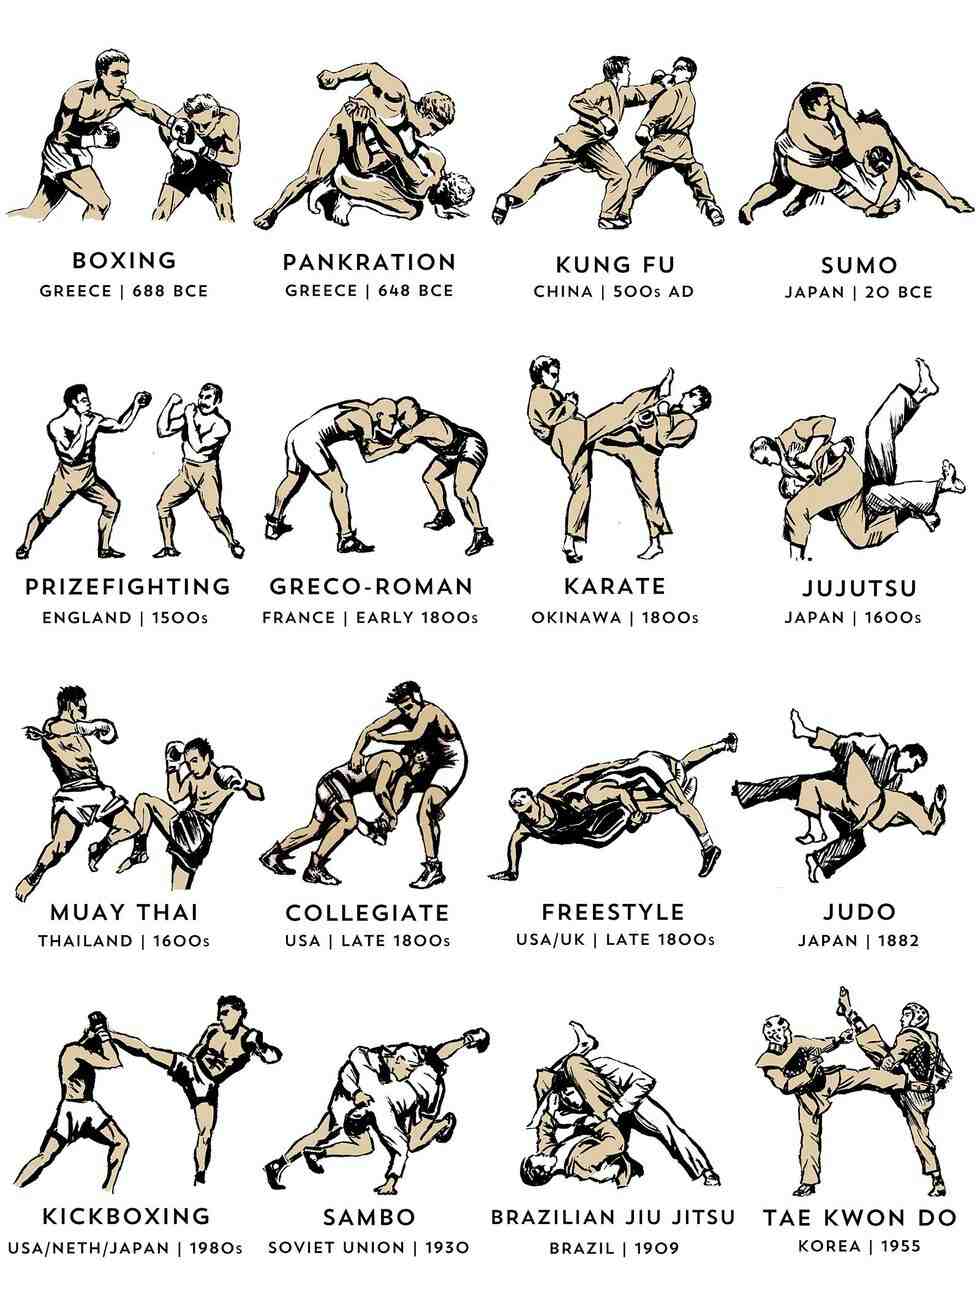 How many types martial arts are there?